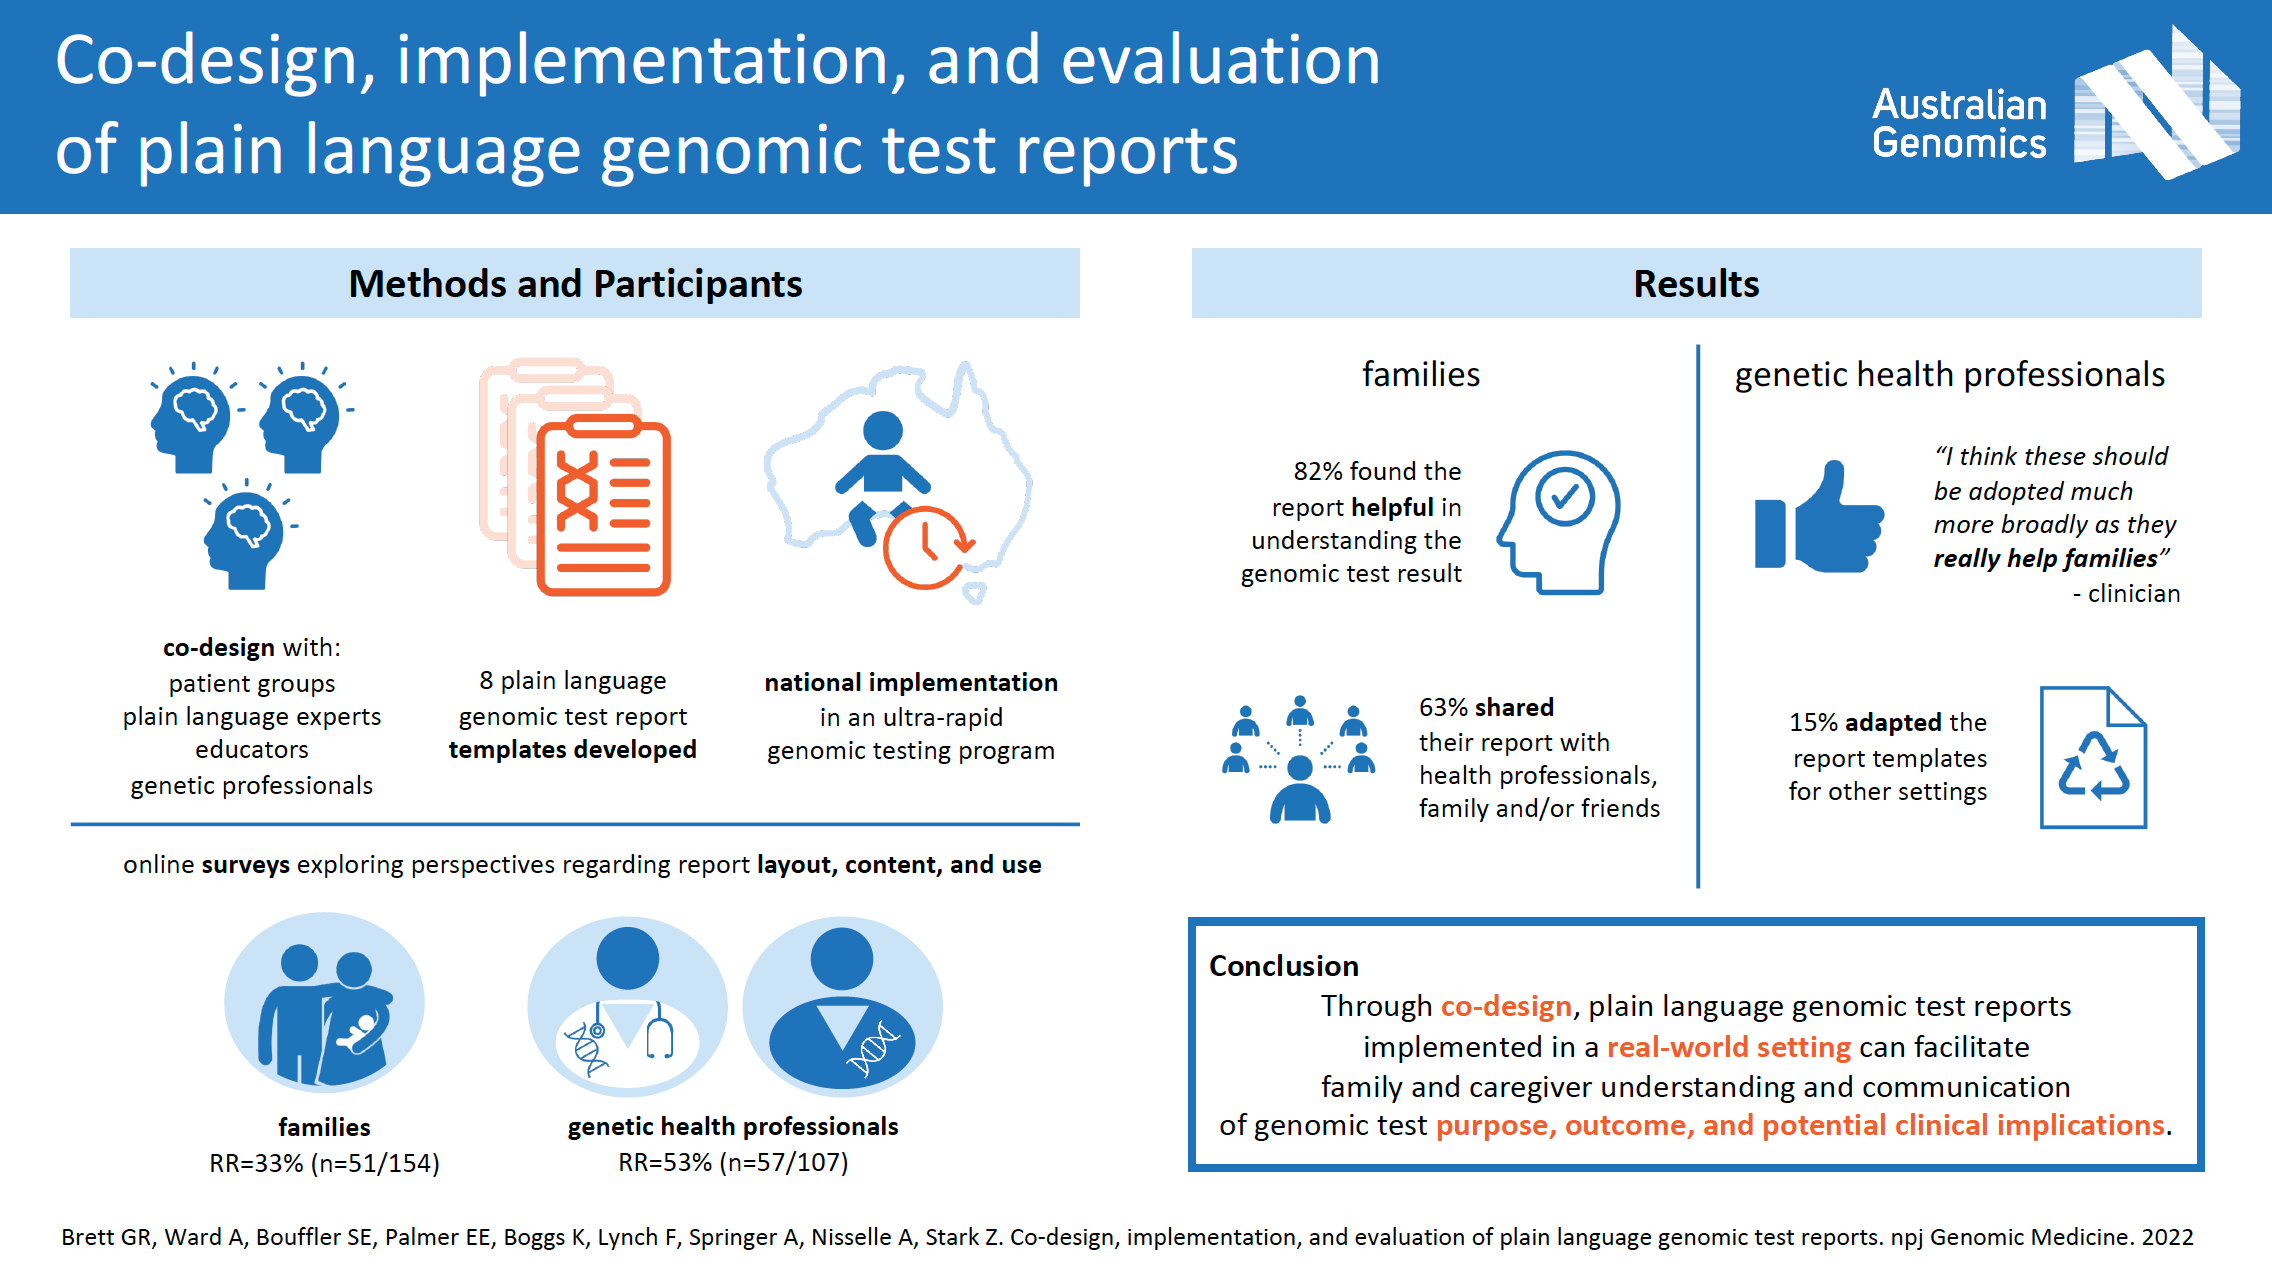 Co-design, implementation, and evaluation of plain language genomic test reports